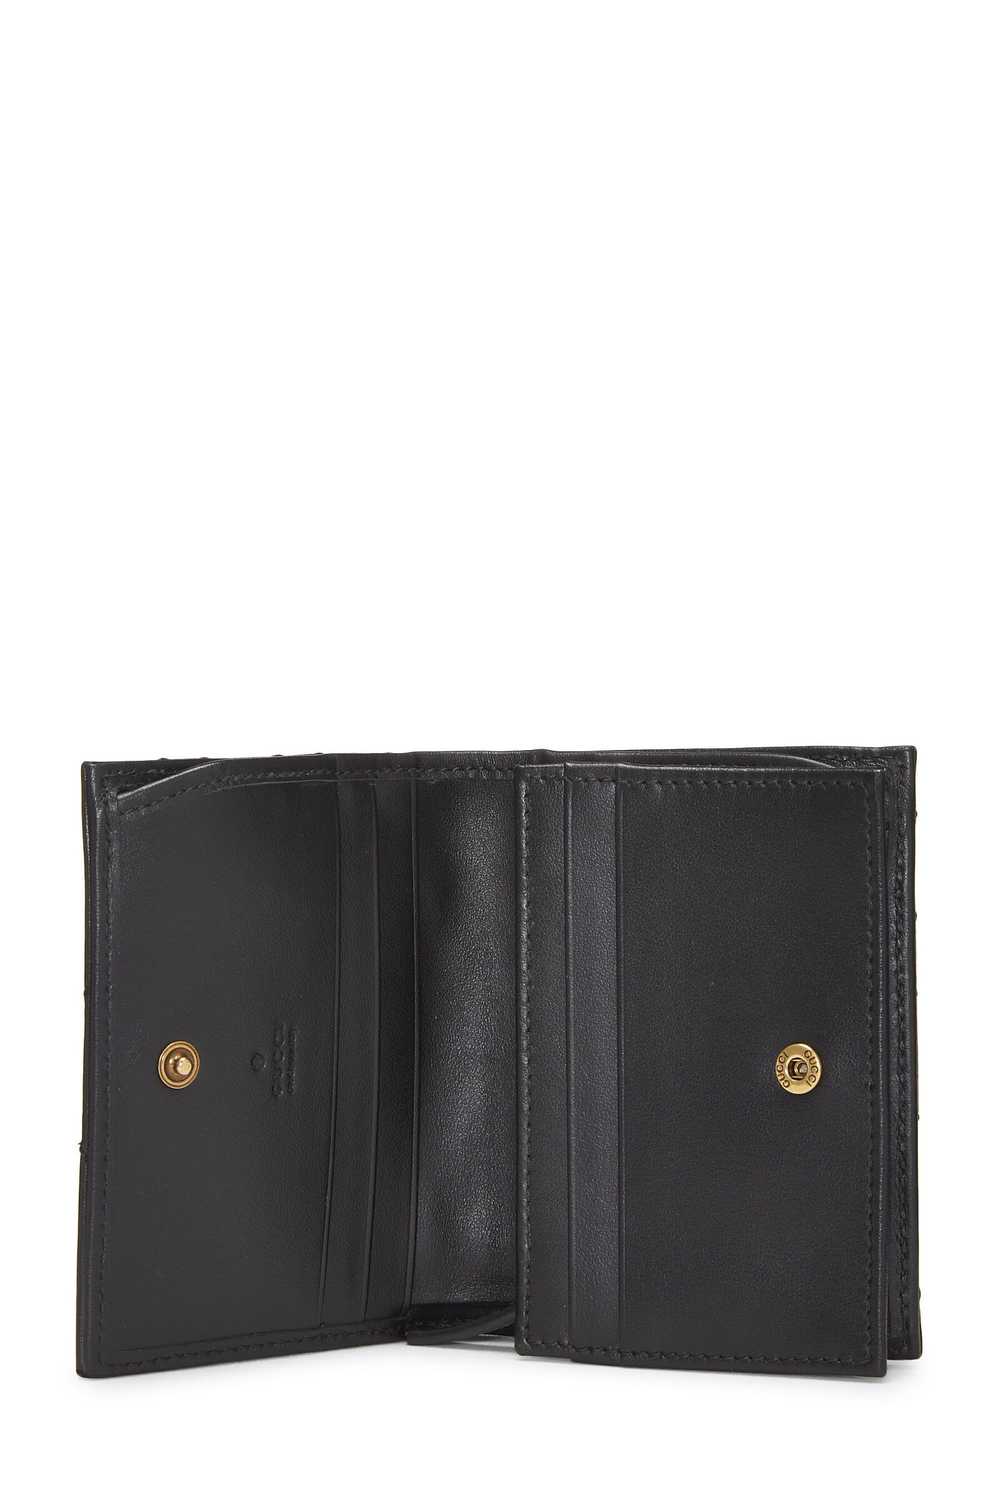 Black Leather Marmont Card Case - image 4